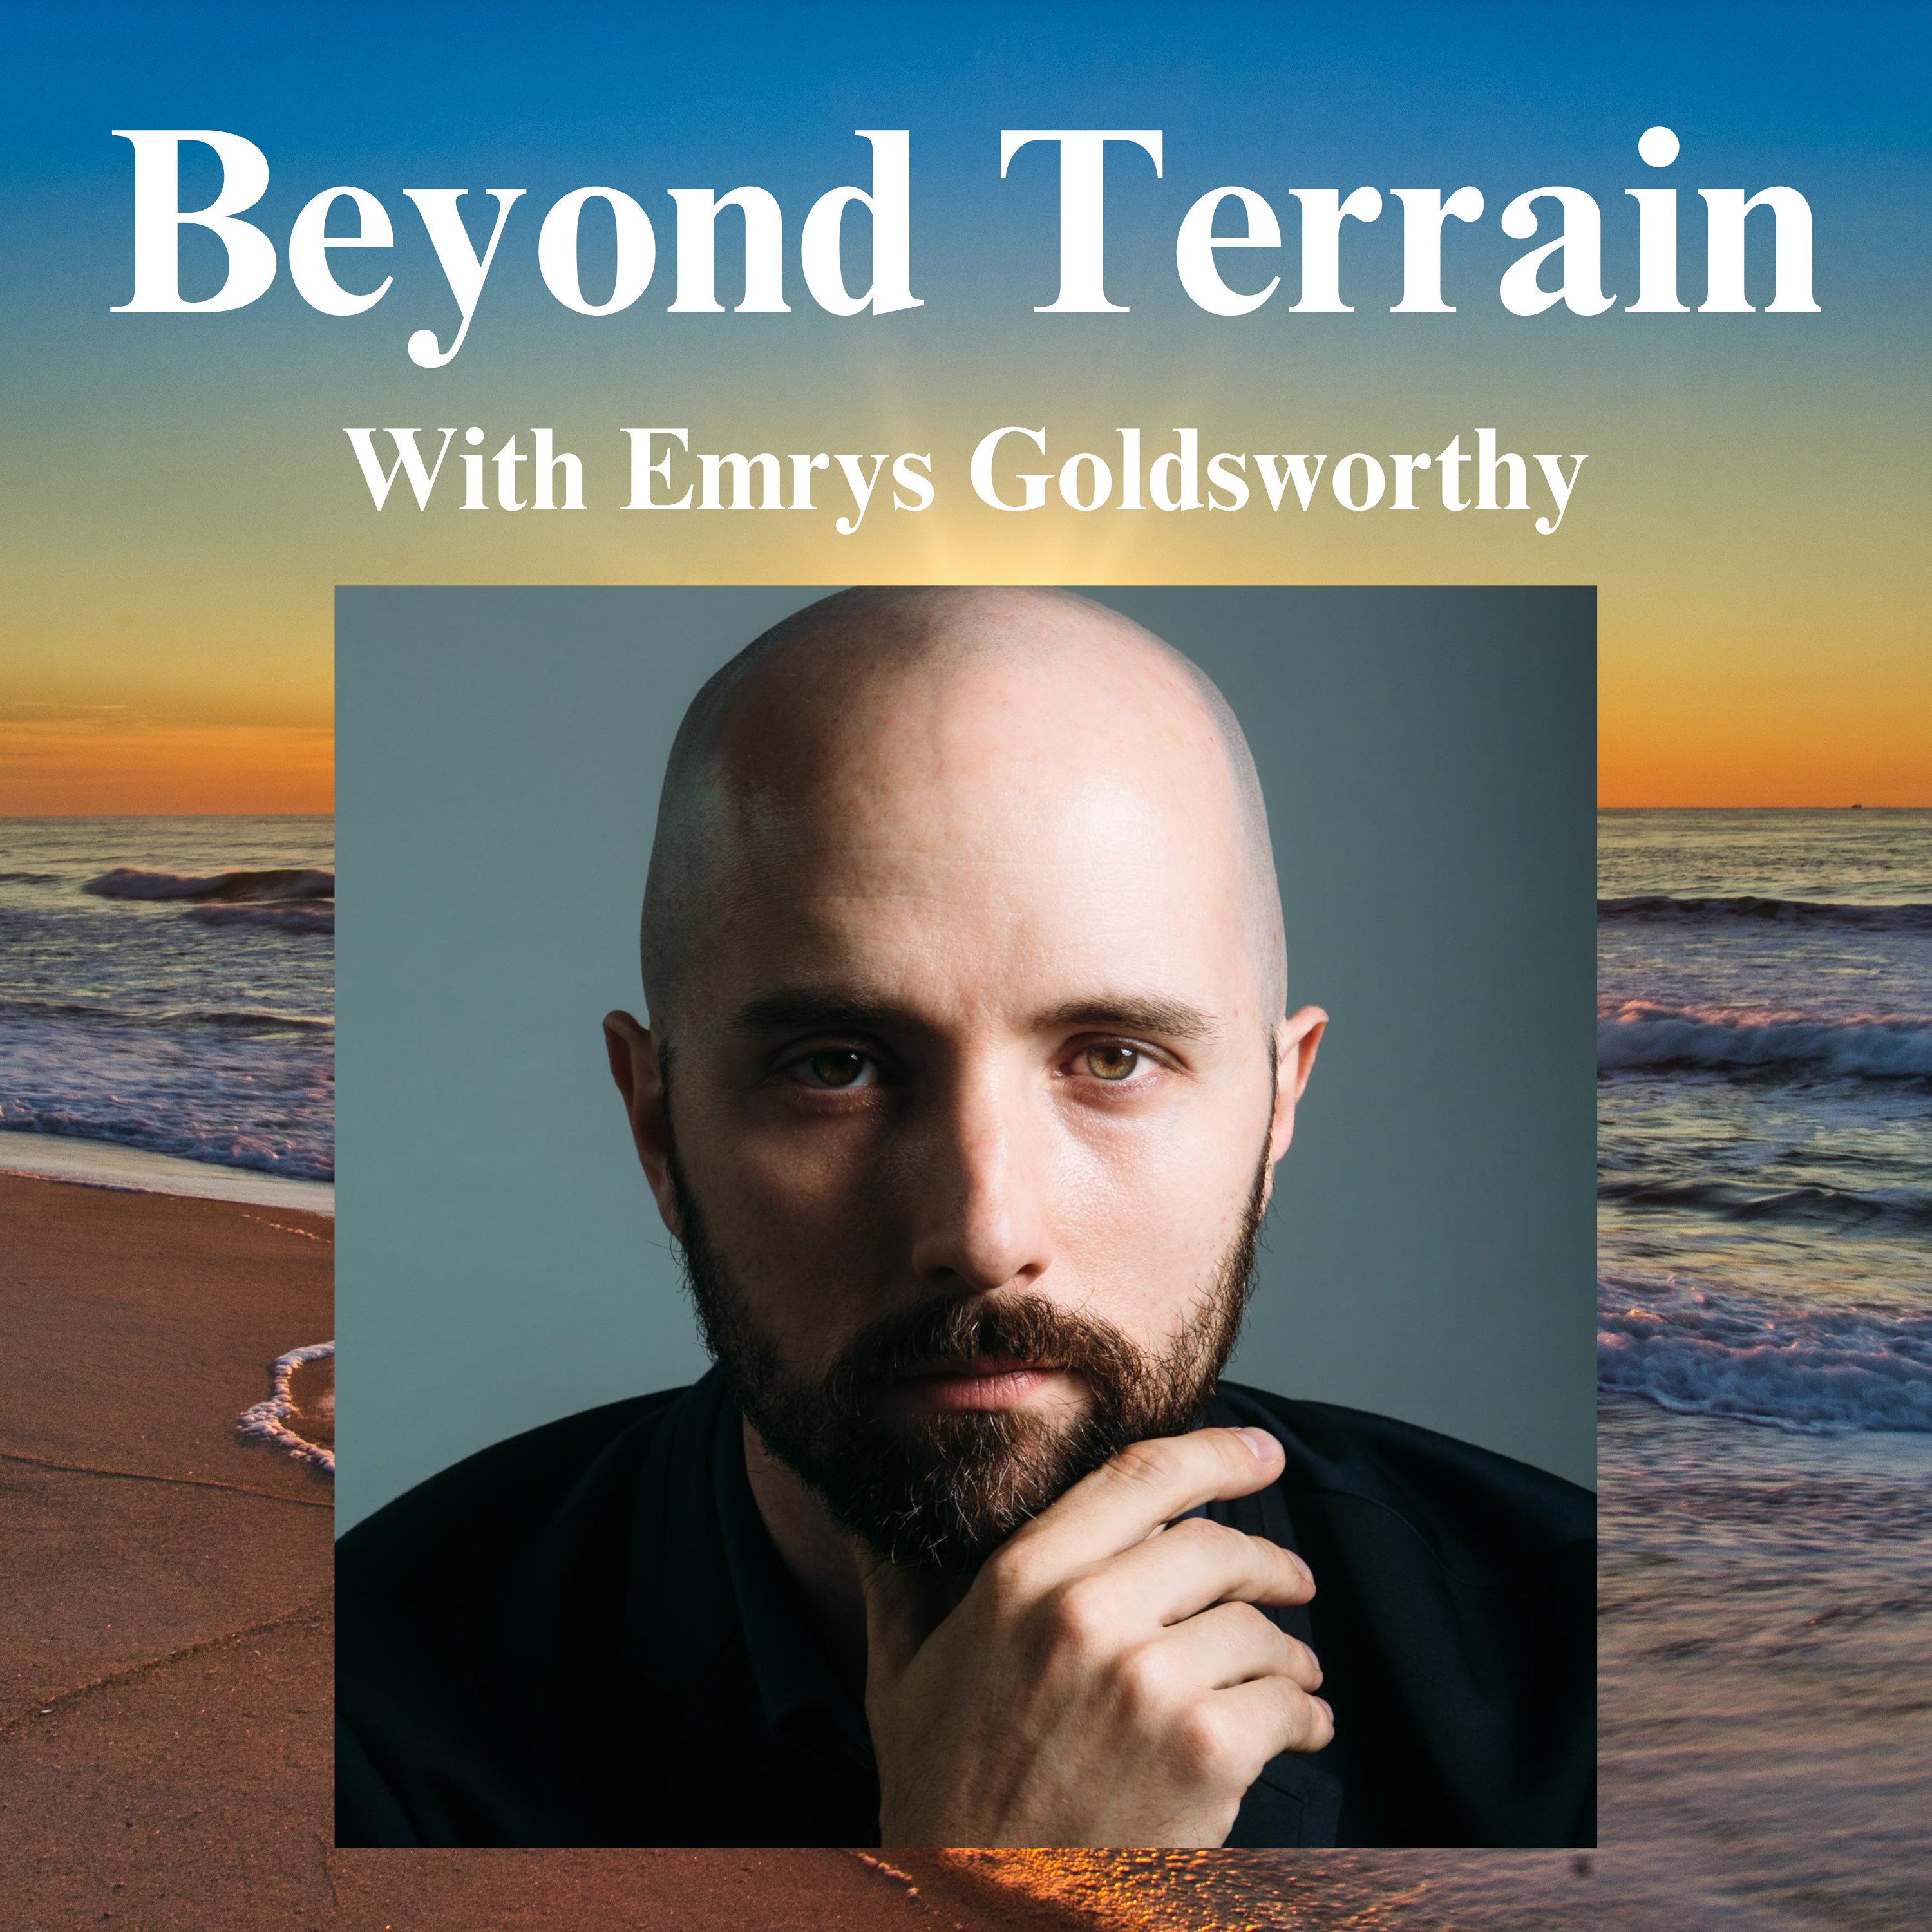 Emrys Goldsworthy on the Vagus Nerve/Tone, Detox, Microbes, Dysautonomia, Nerve Functioning, and so Much More!